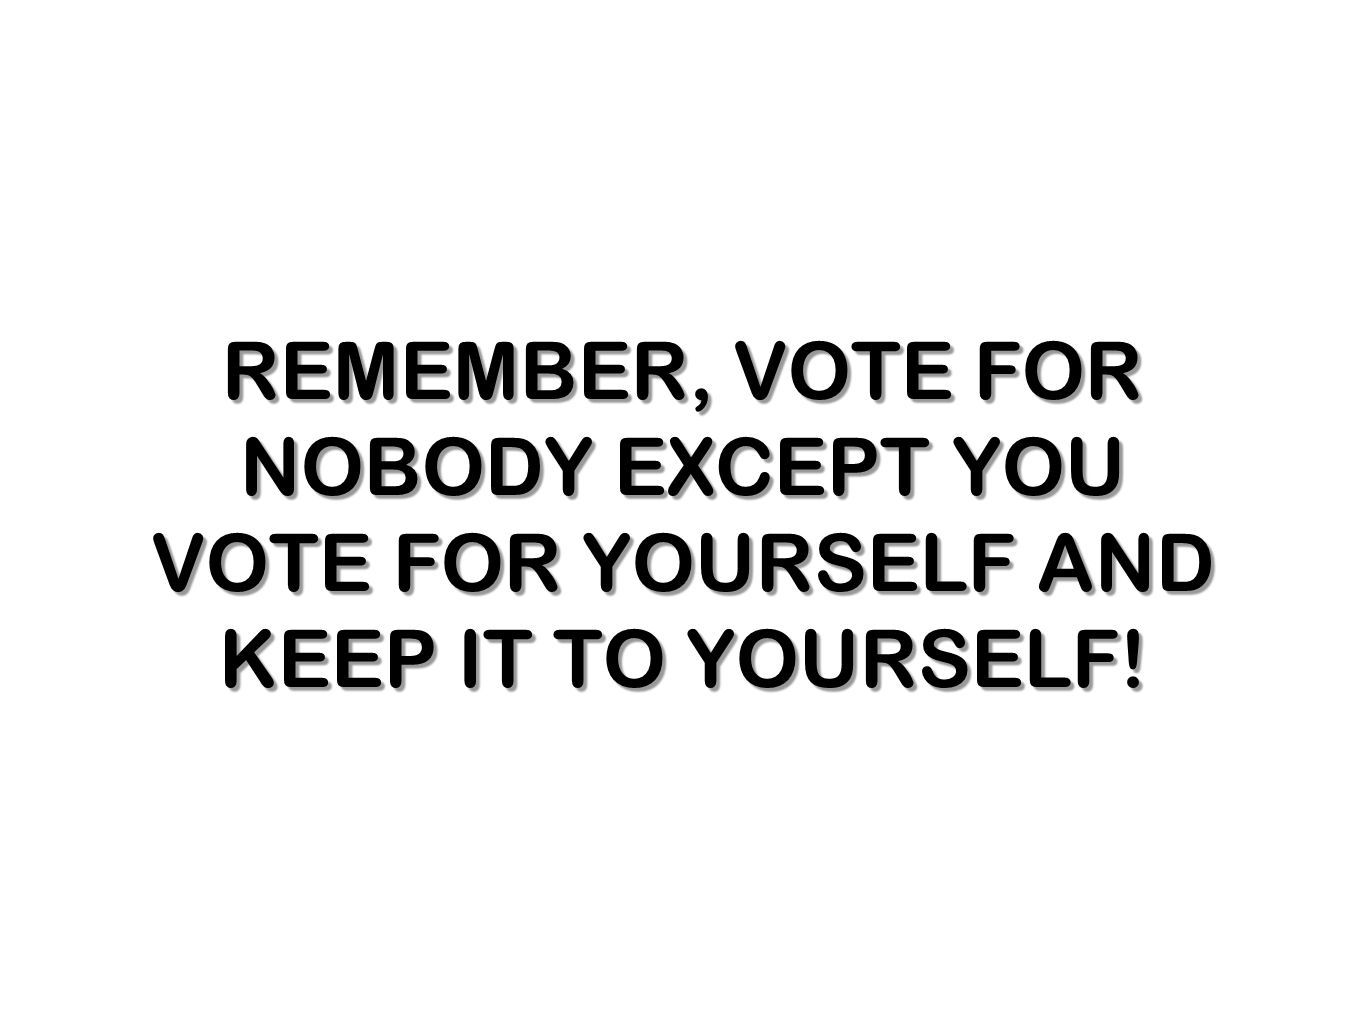 REMEMBER, VOTE FOR NOBODY EXCEPT YOU VOTE FOR YOURSELF AND KEEP IT TO YOURSELF!